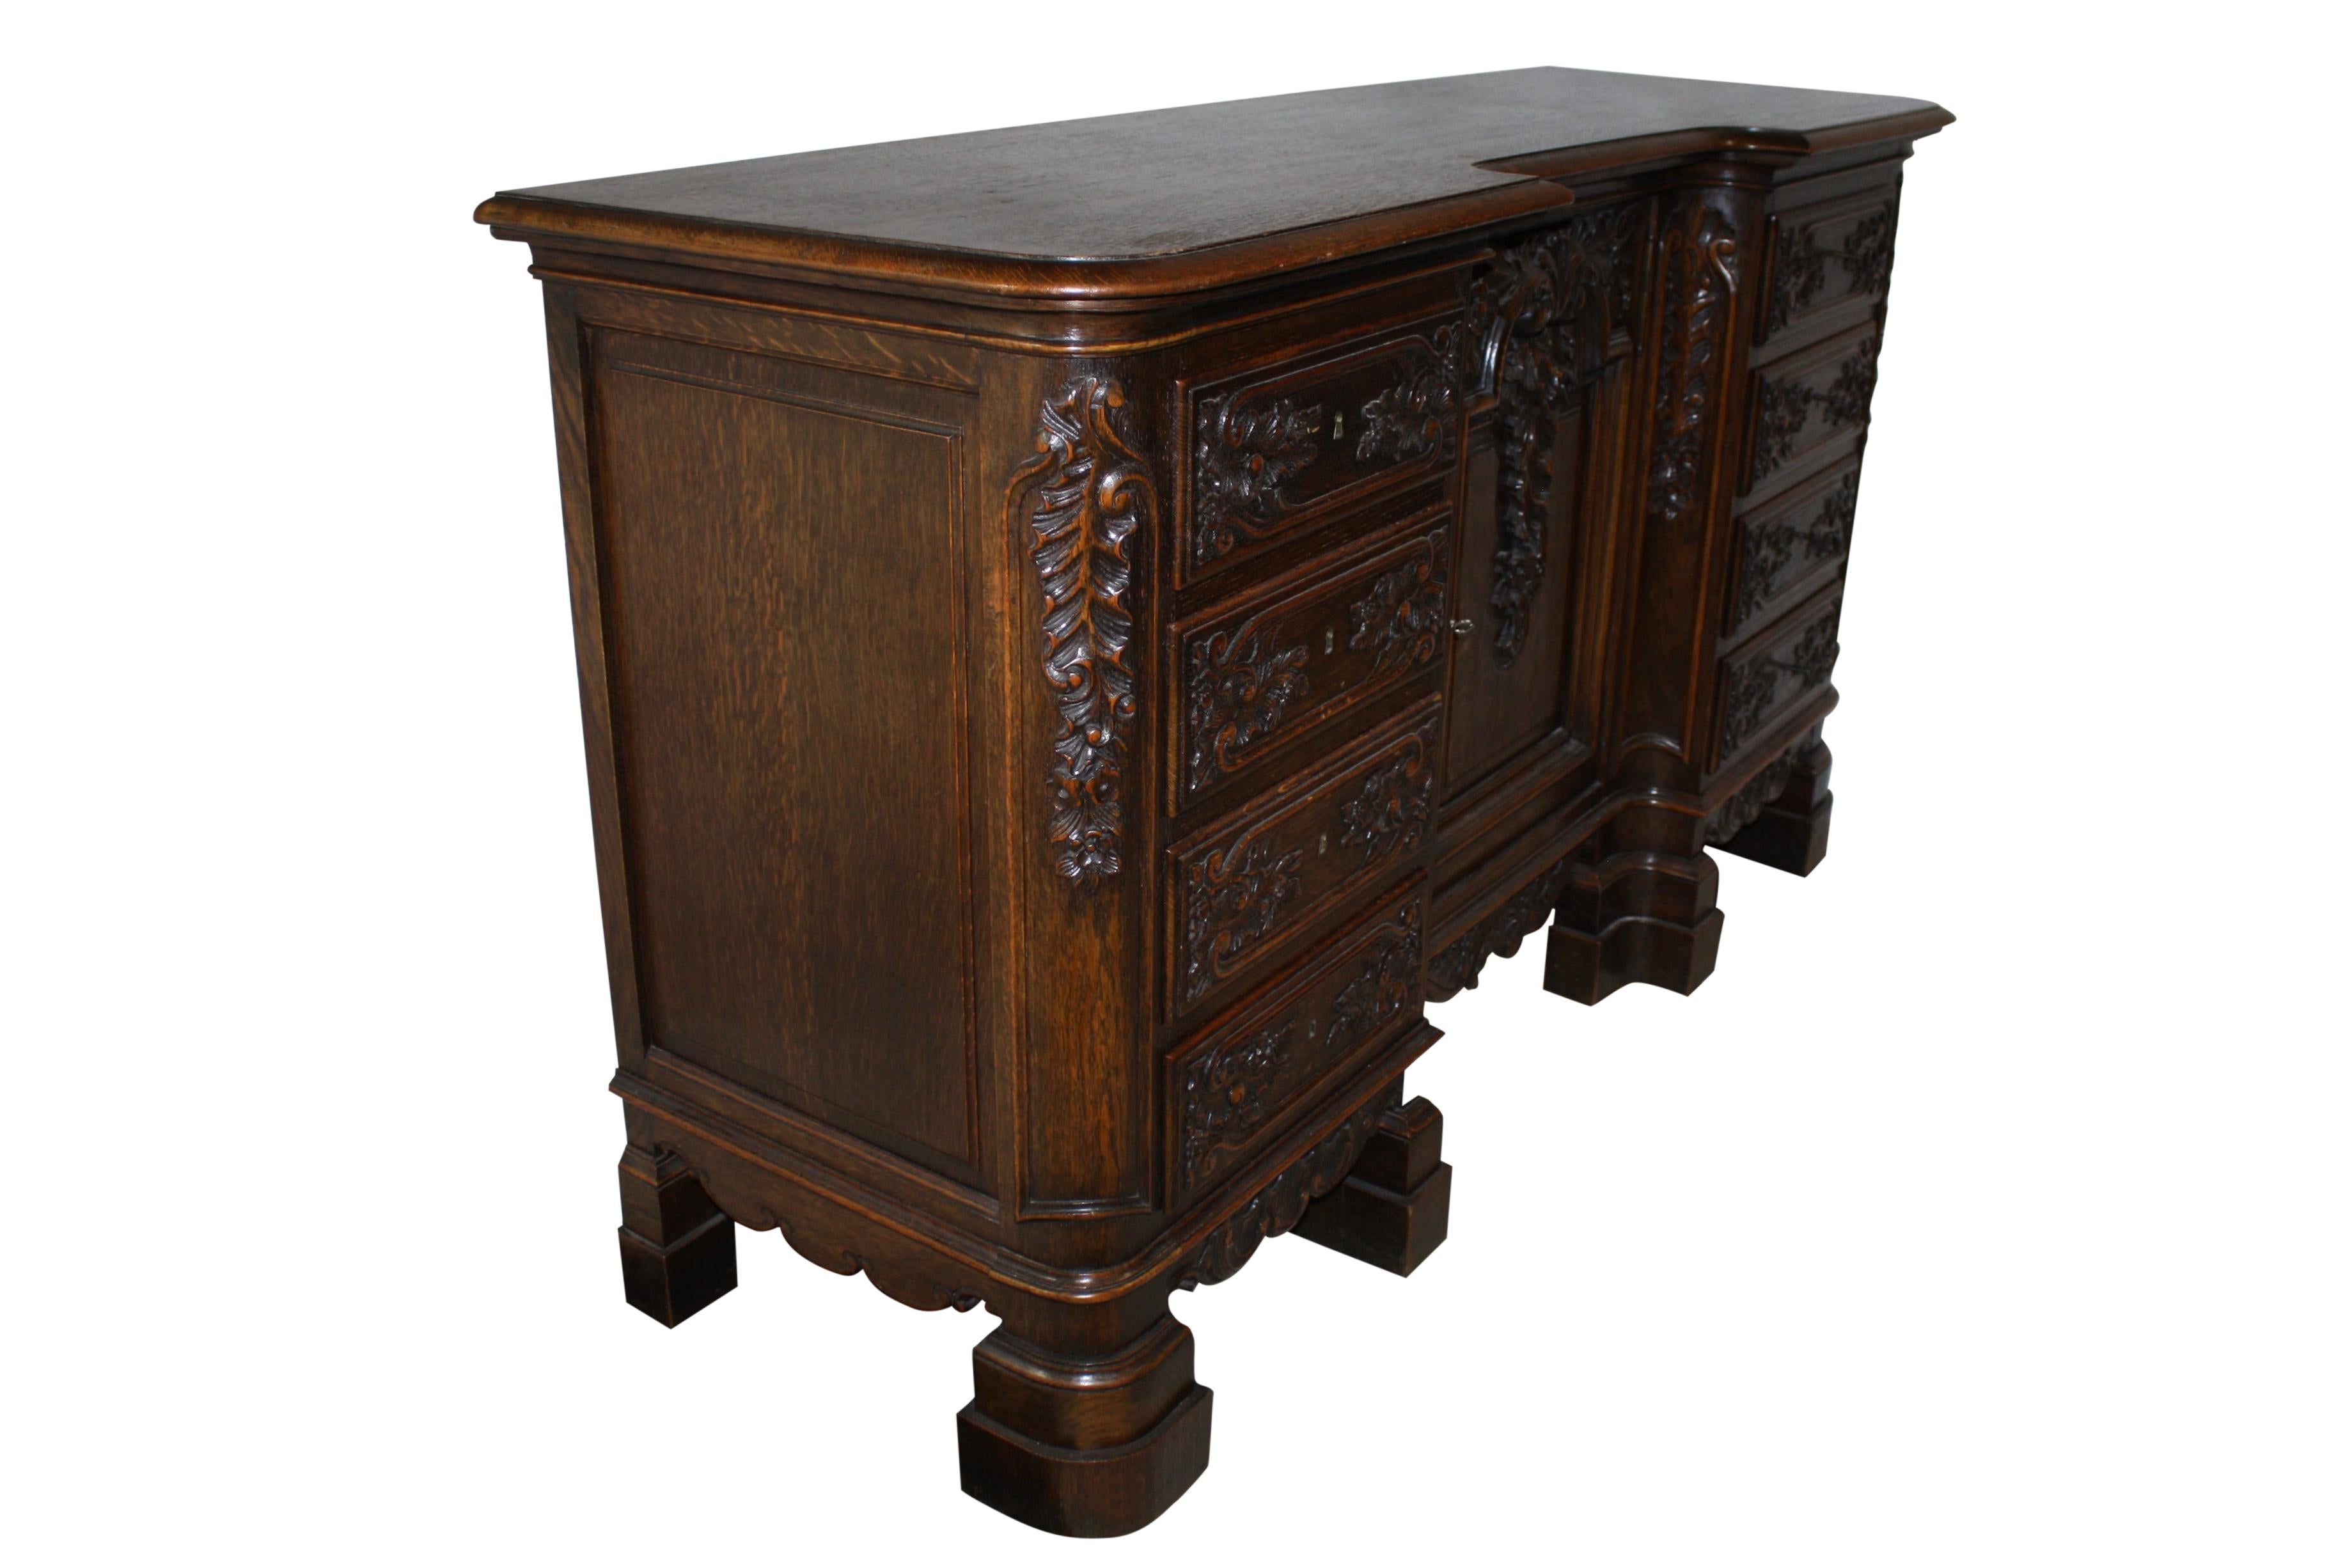 Featuring reverse breakfront construction with a set back center, this stunning server showcases foliated carvings with dainty flowers, C scrolls, and ribbon. The center door, which opens to two shelves, is flanked by four drawers on each side. The